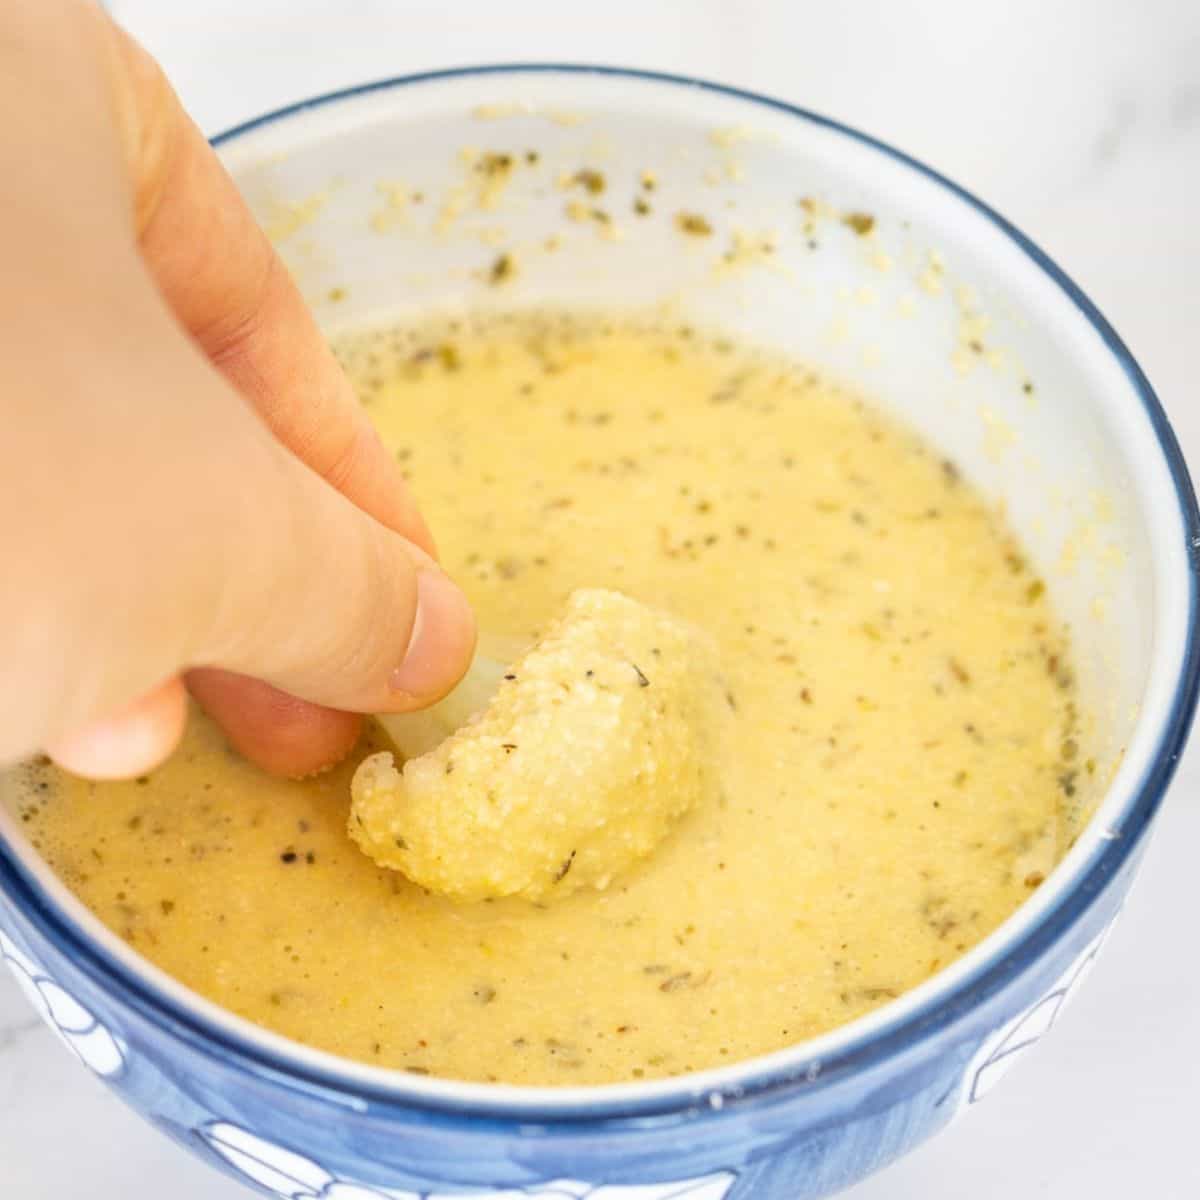 Dipping cauliflower into vegan egg substitute made with chickpea flour.